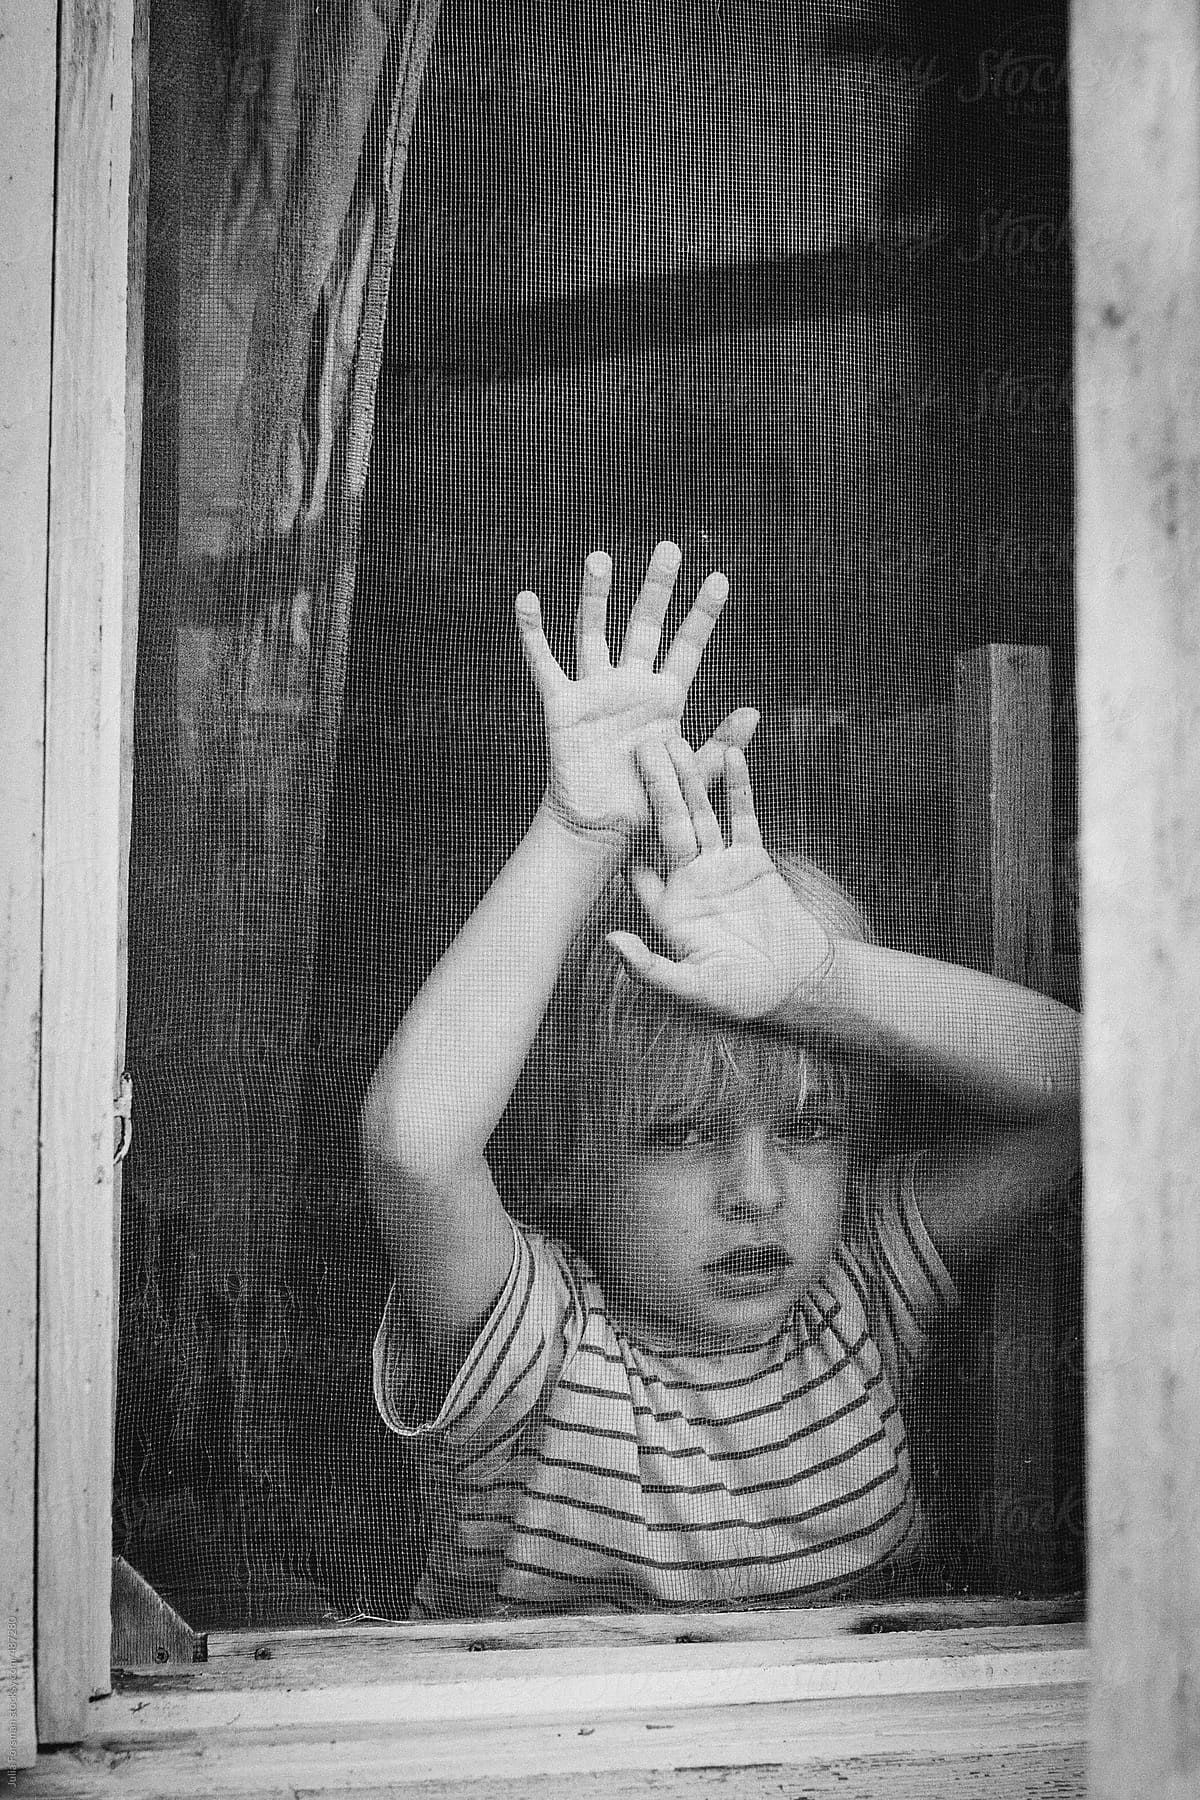 Boy looks out of an old wooden window.